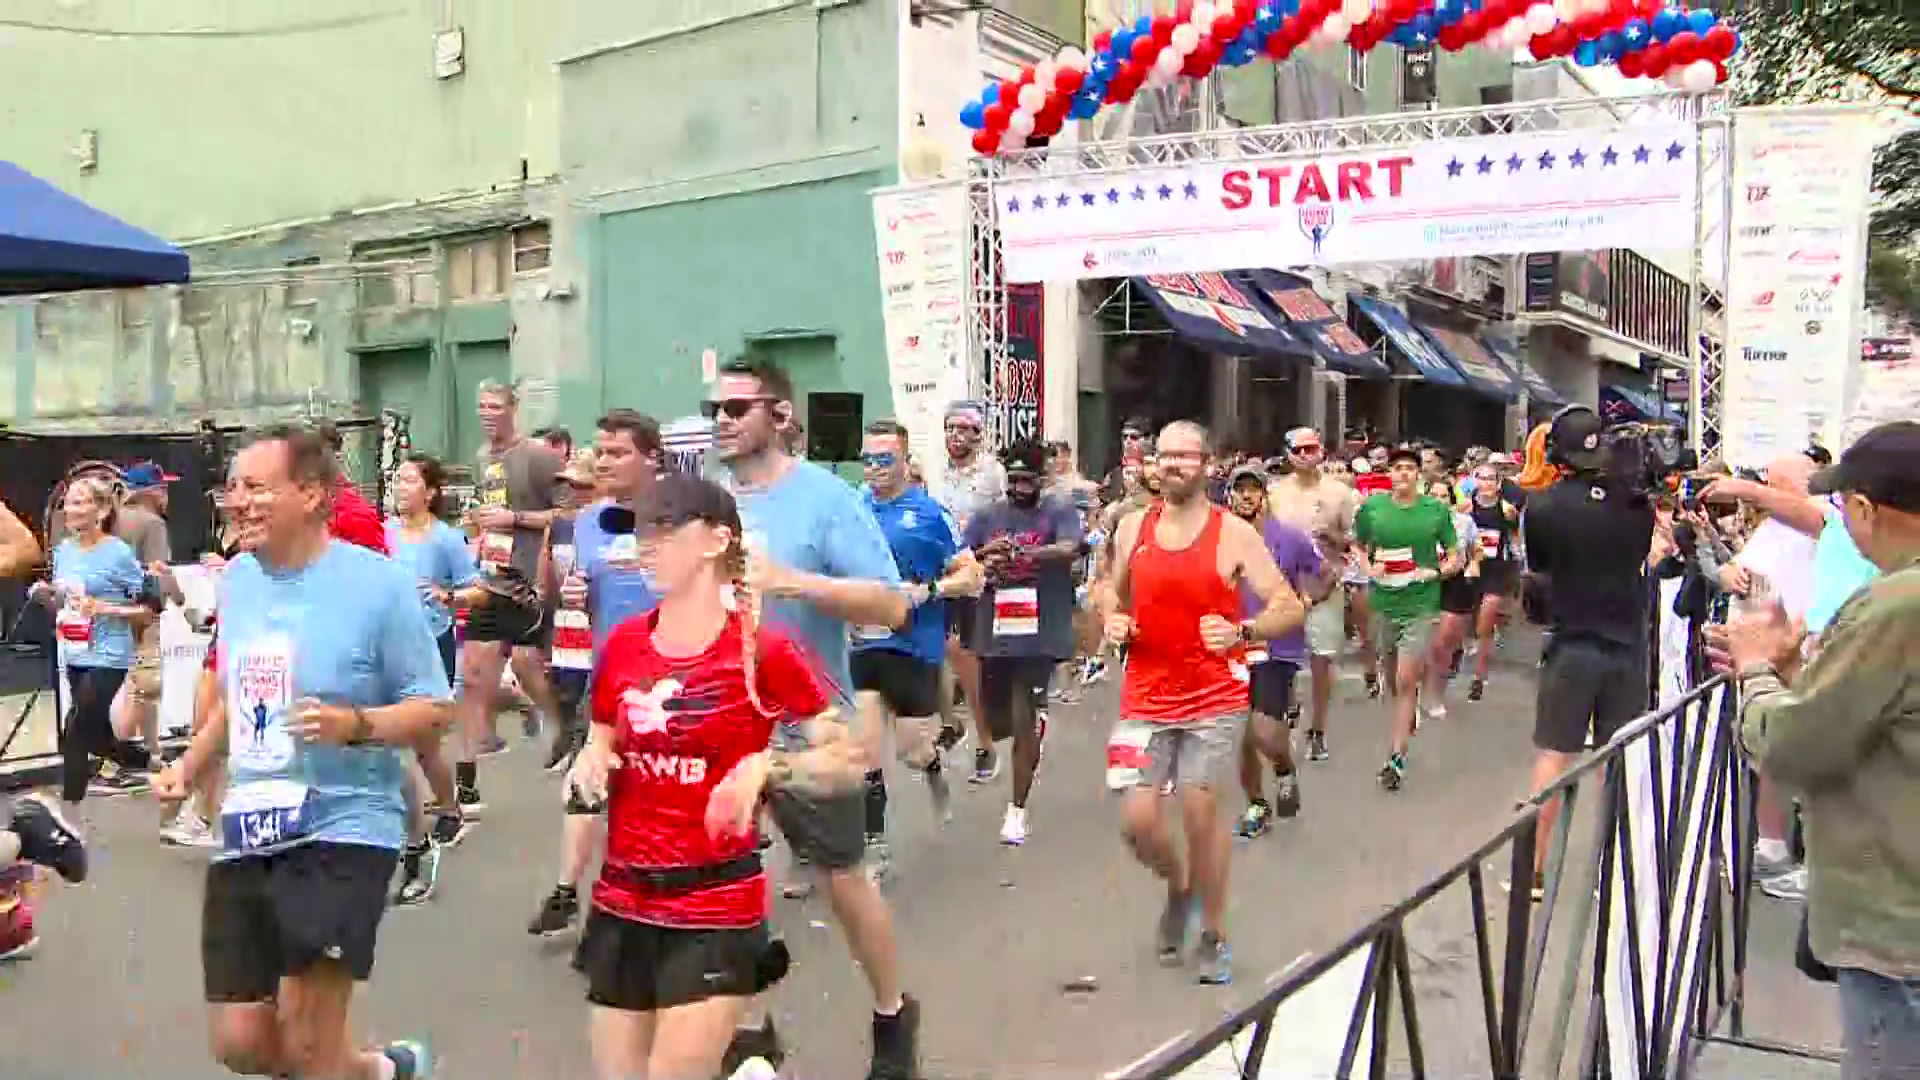 14th annual Run to Home Base at Boston's Fenway Park raises nearly